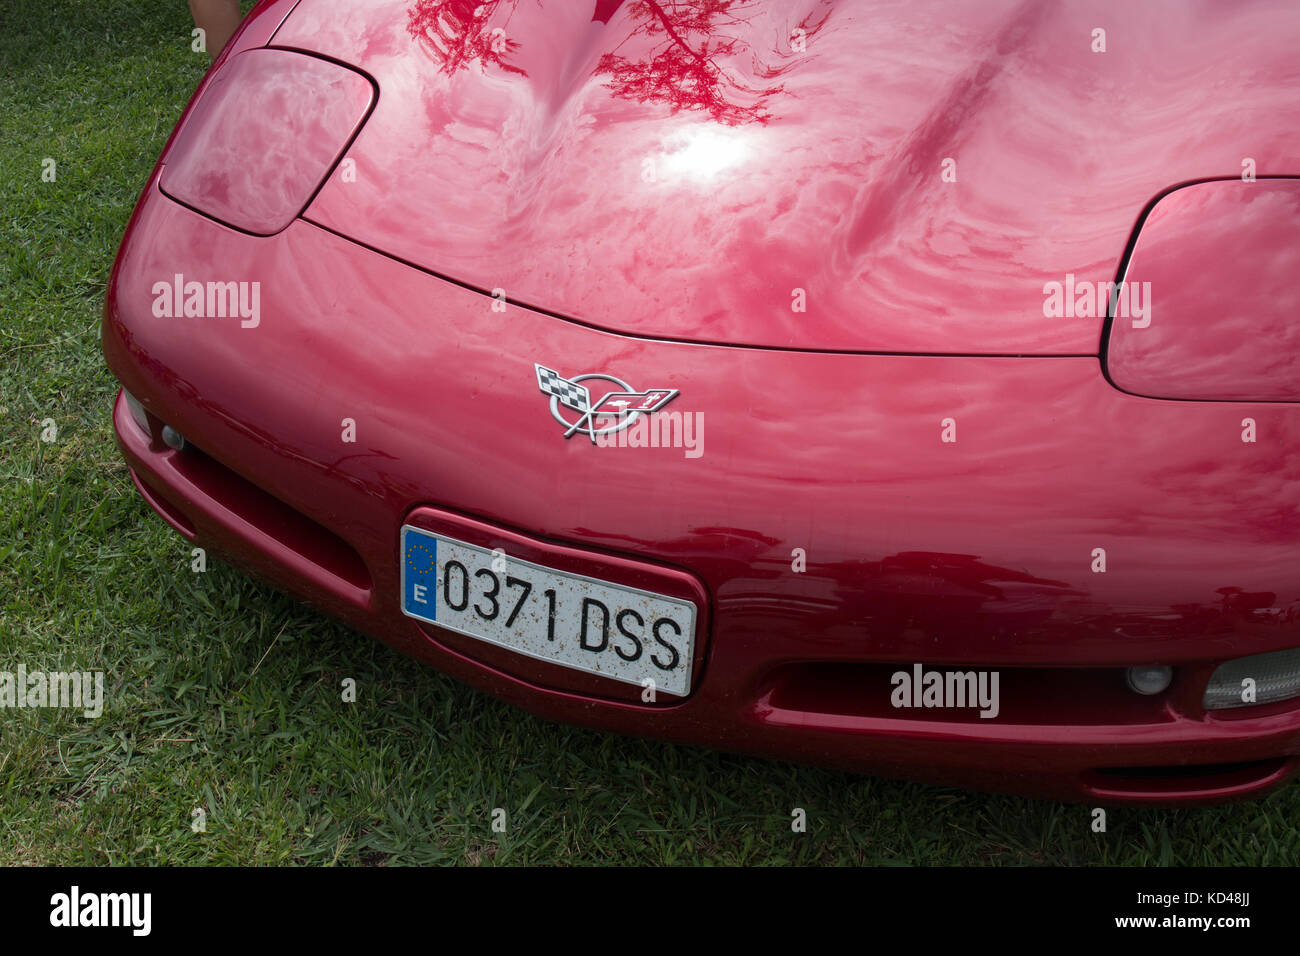 FARO, PORTUGAL, 26th August 2017: Close up view of a Chevrolet Corvette C5 coupe. Stock Photo